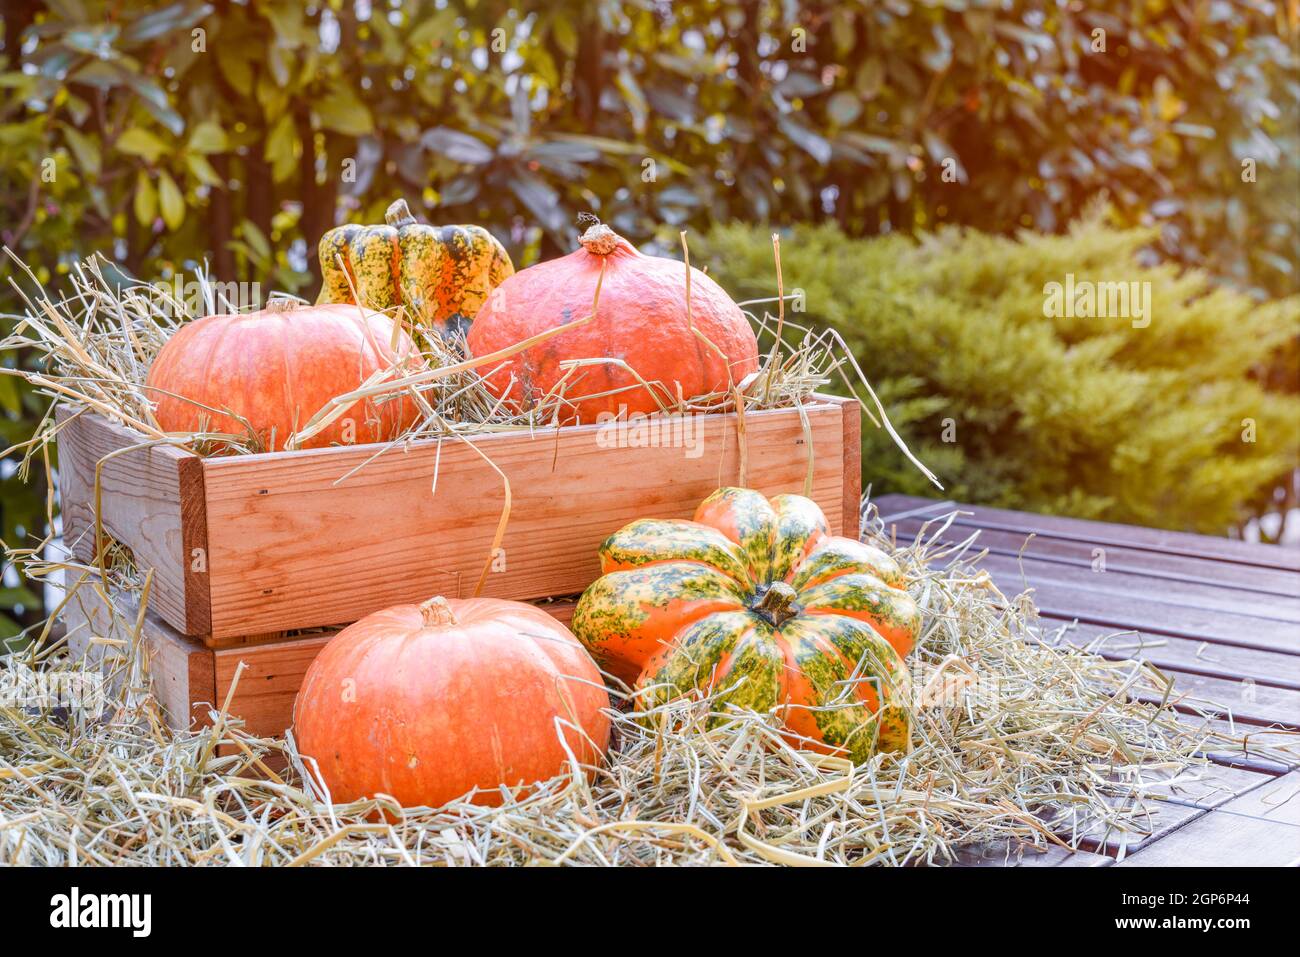 Small pumpkins on a wooden box full of hay on a wooden table in a backyard. Halloween and thanksgiving decorations. Copy Space. Stock Photo